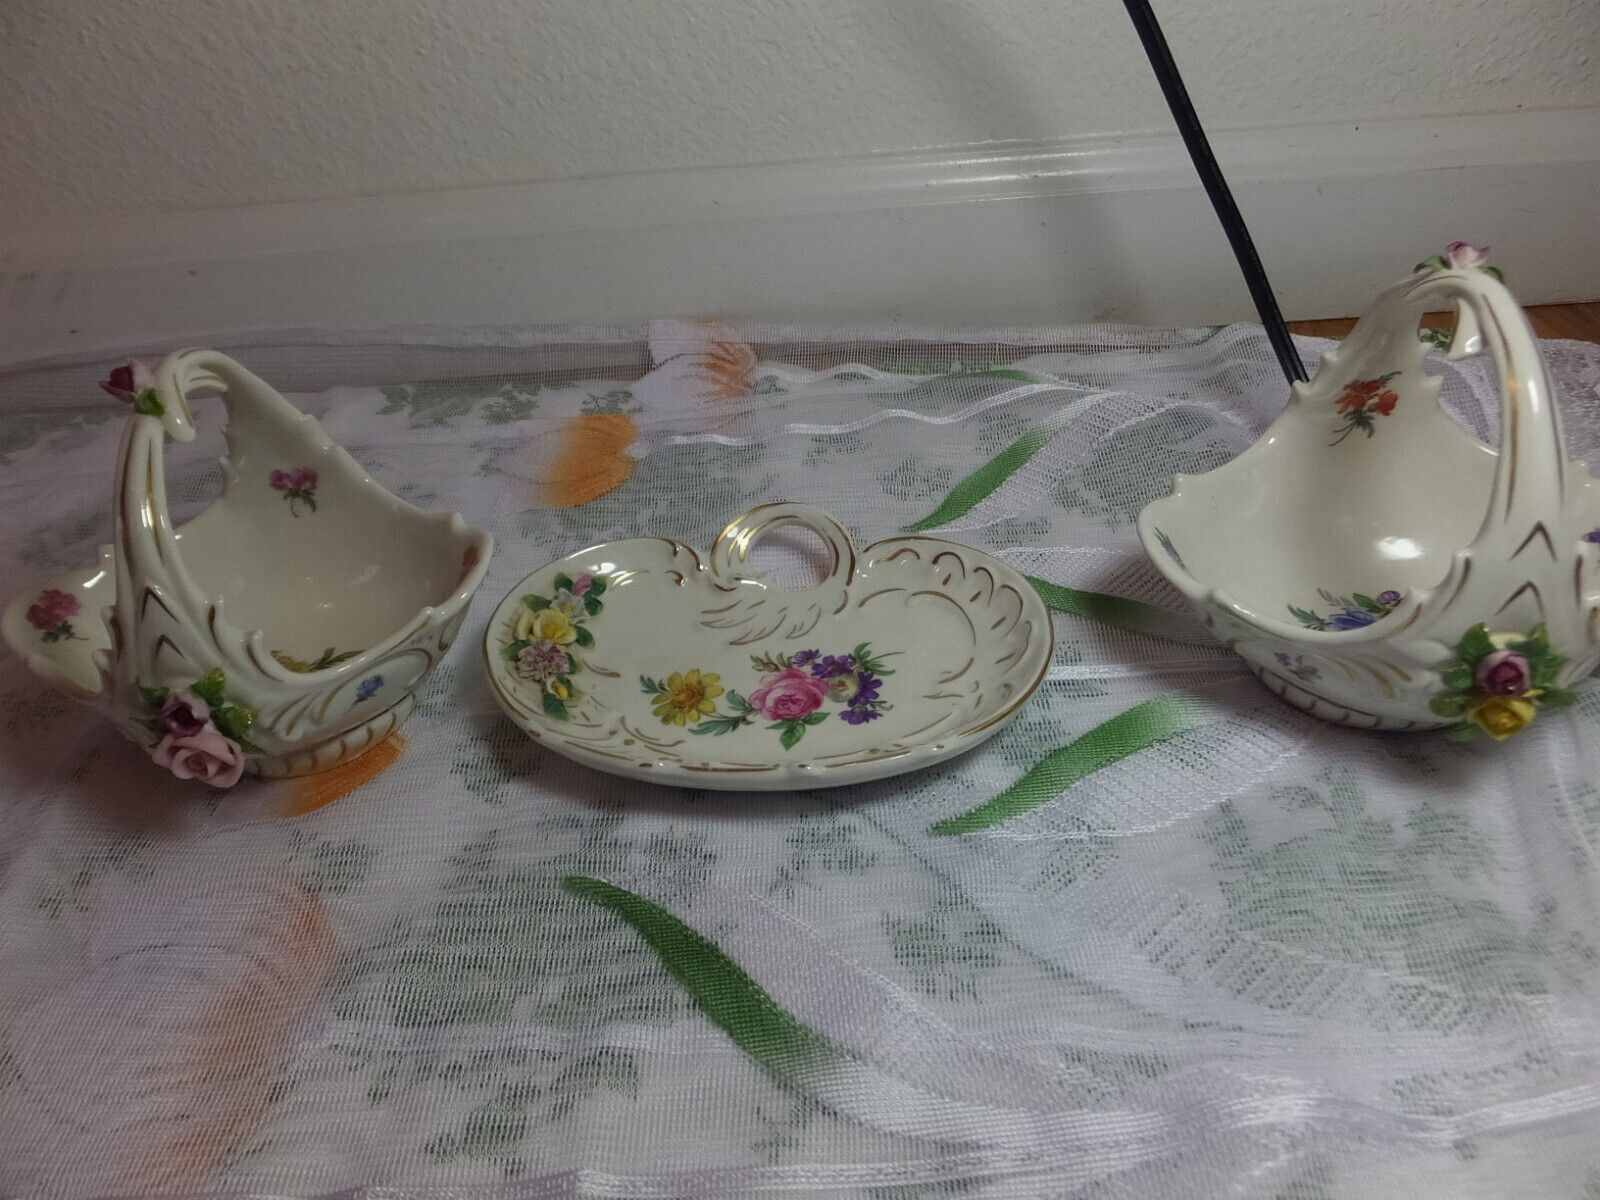 Unique Dresden porcelain plate and two flower baskets